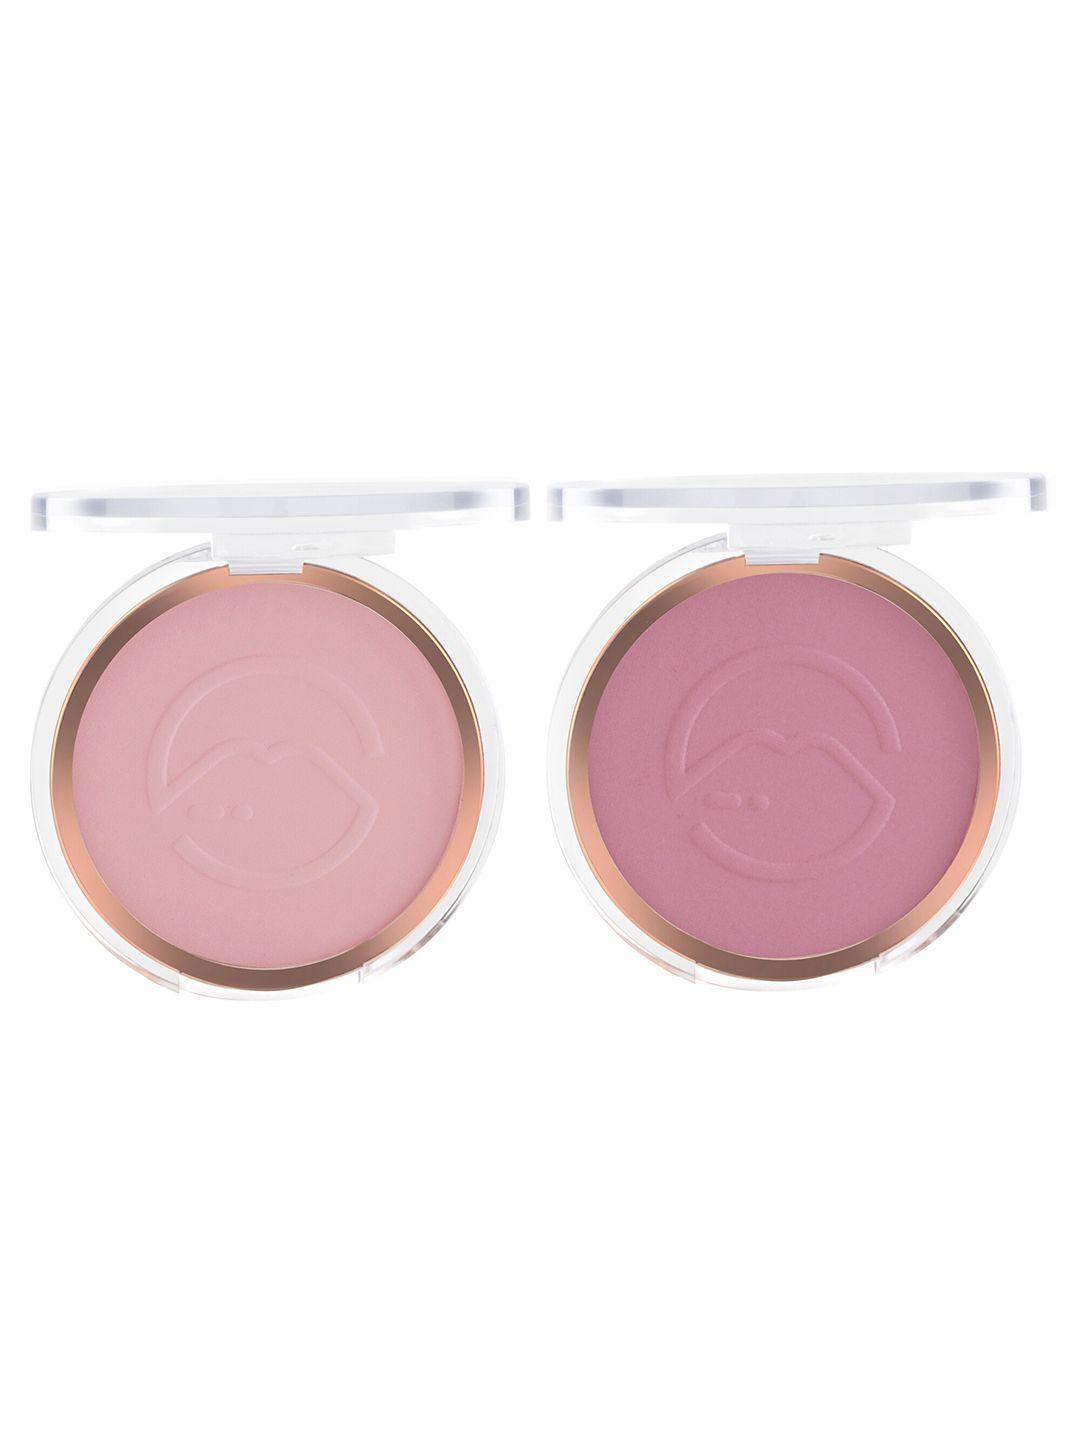 mars set of 2 flush of love highly pigmented matte face blusher - shade 06 & 05